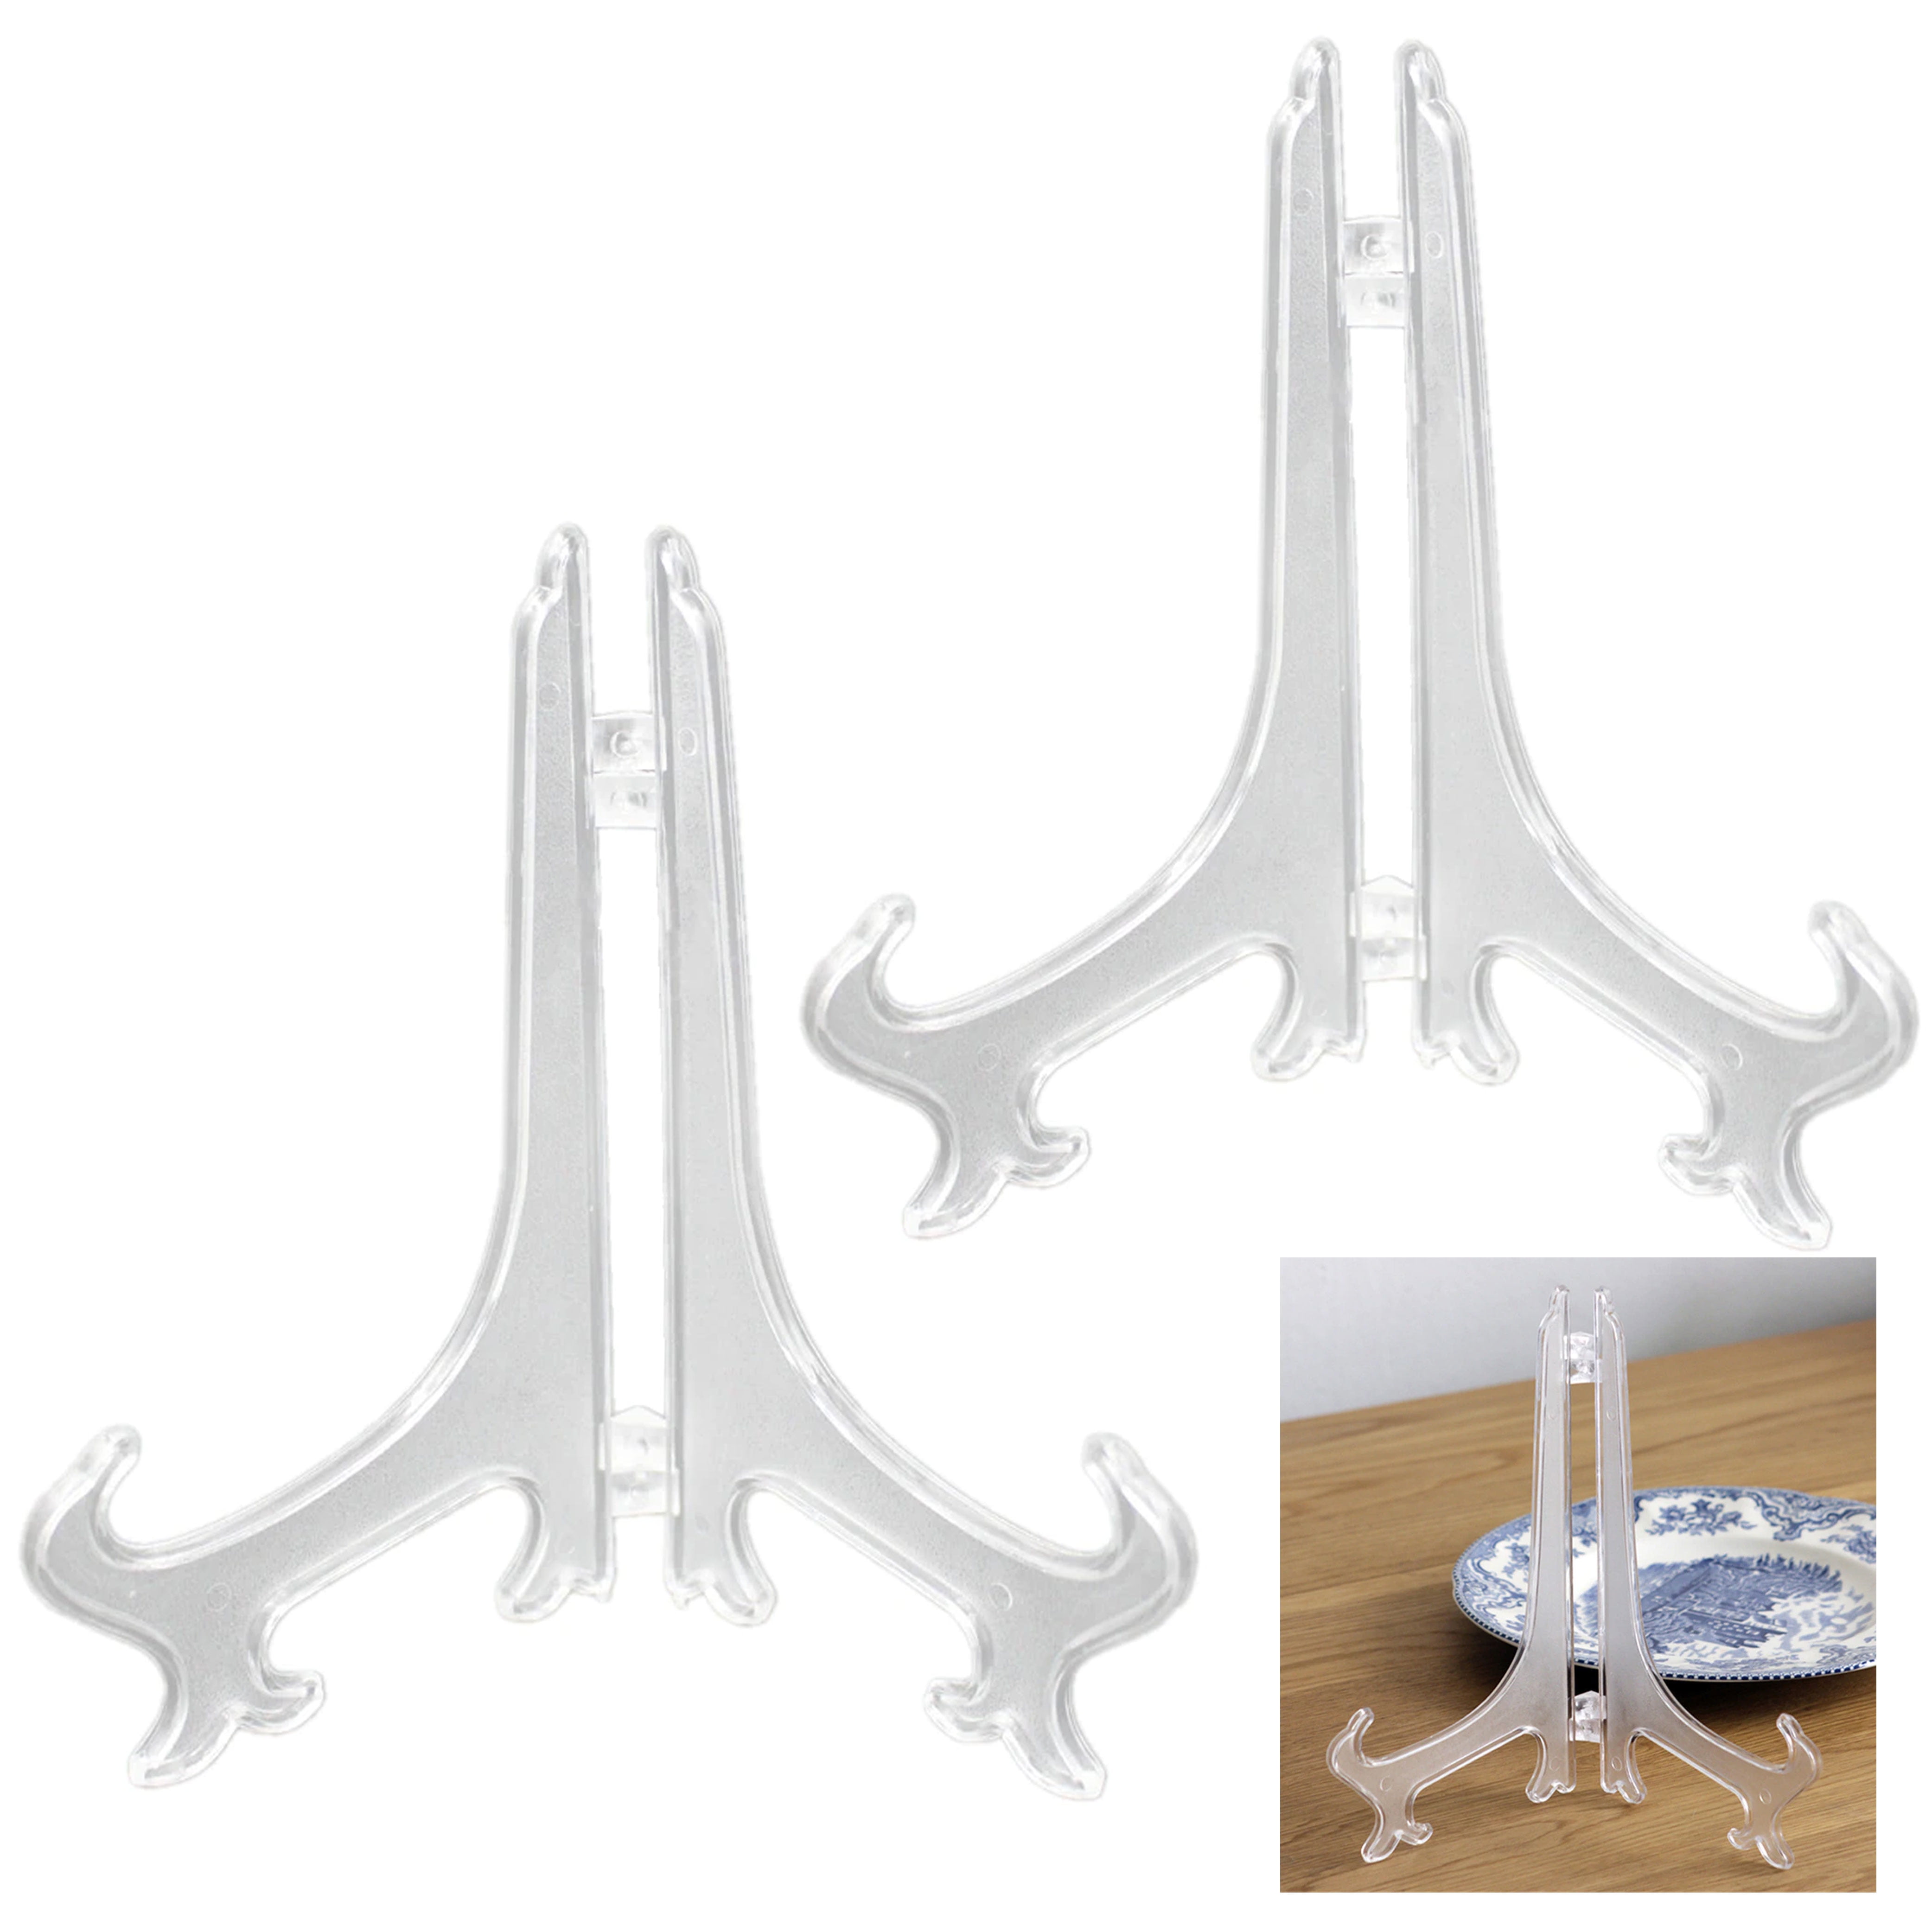 Clear Plastic Easels or Stand Plate Holders to Display Pictures or Oth EW 